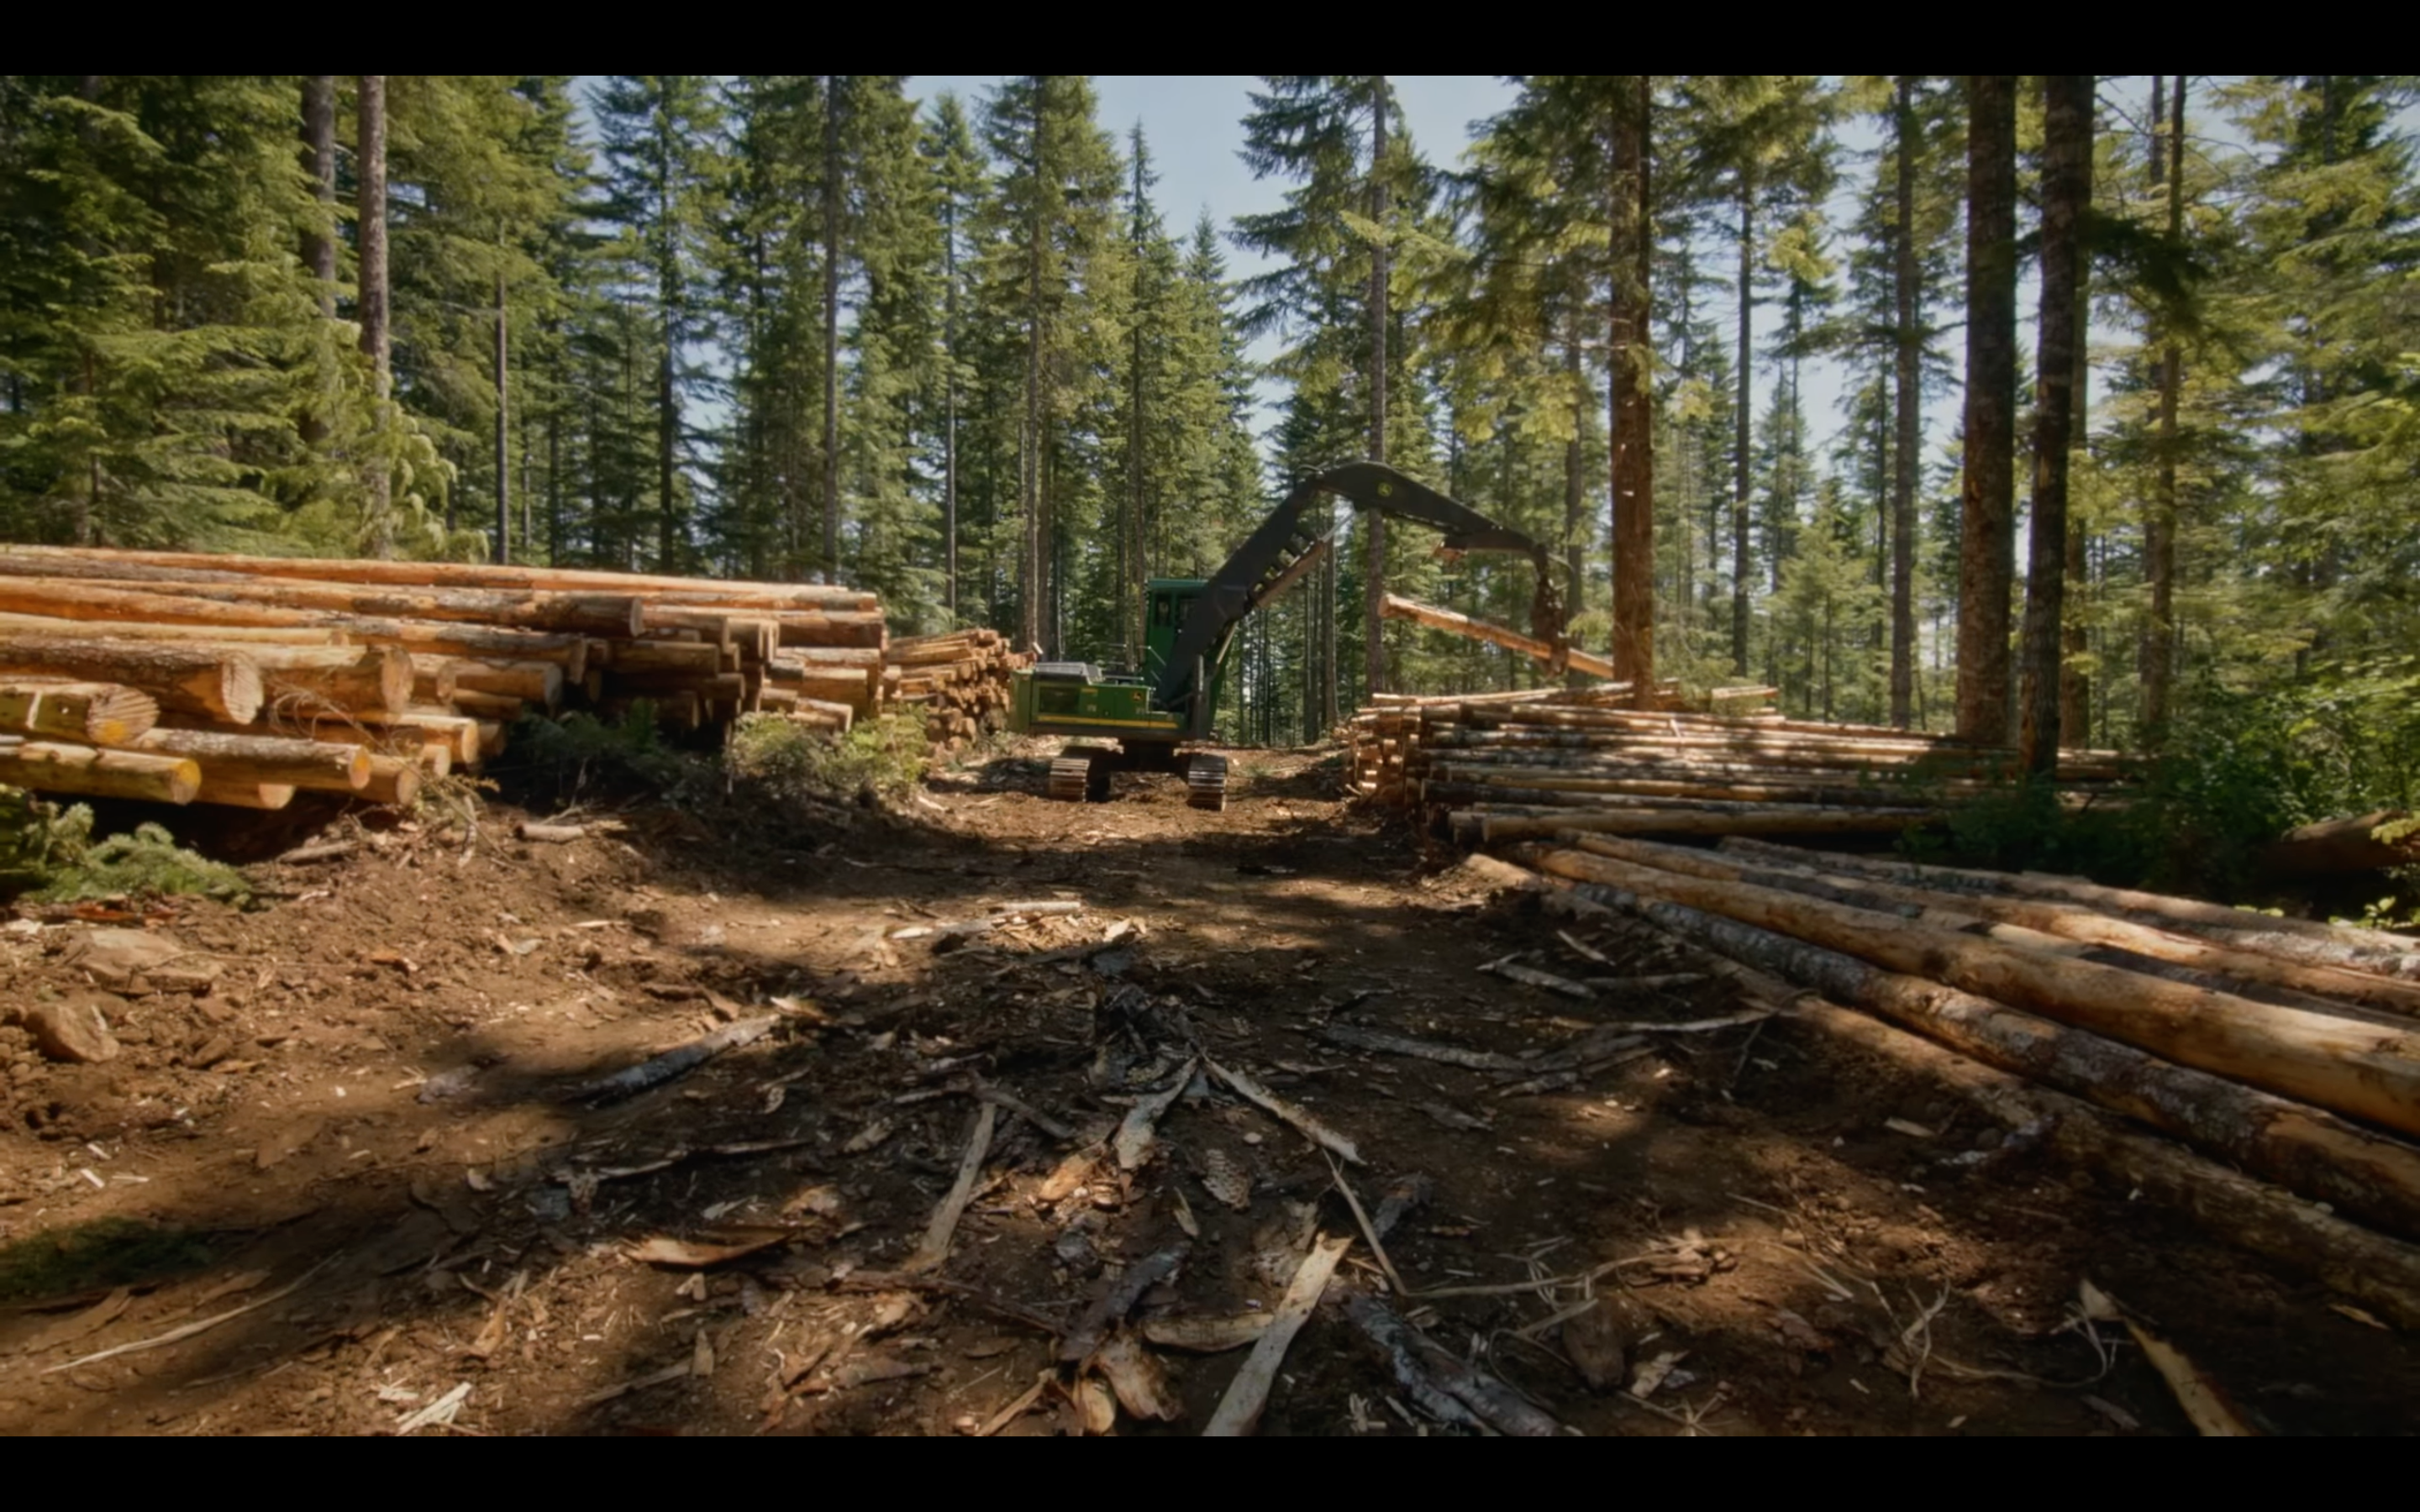 A coniferous forest with logged trees and logging equipment.